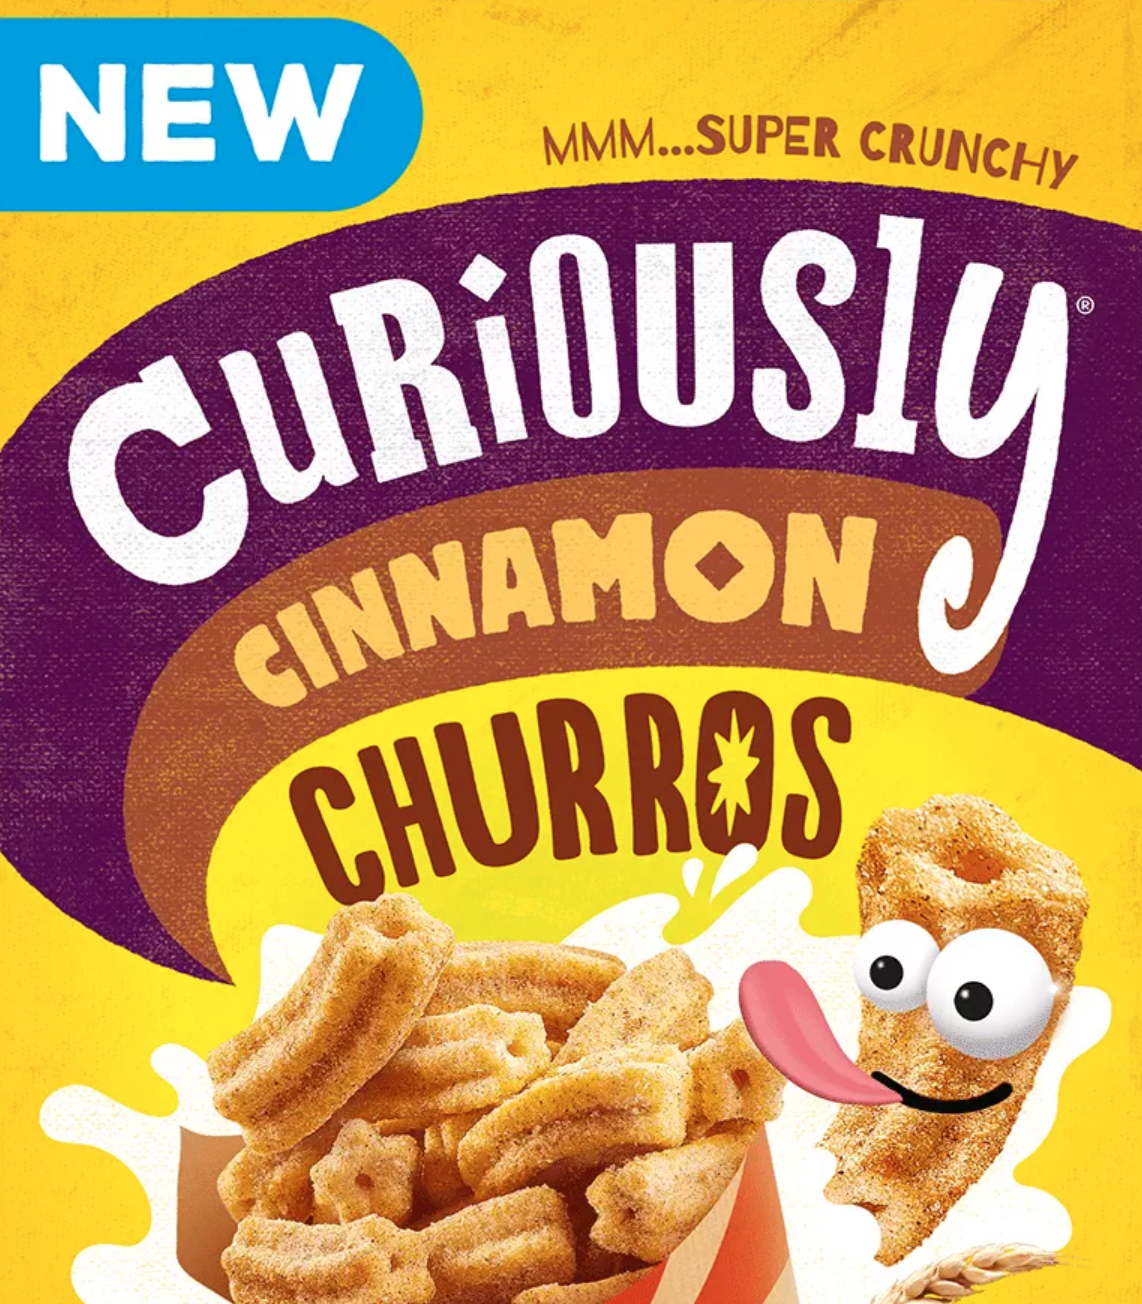 People are going mad for new Curiously Cinnamon cereal that&#8217;s shaped like churros, The Manc